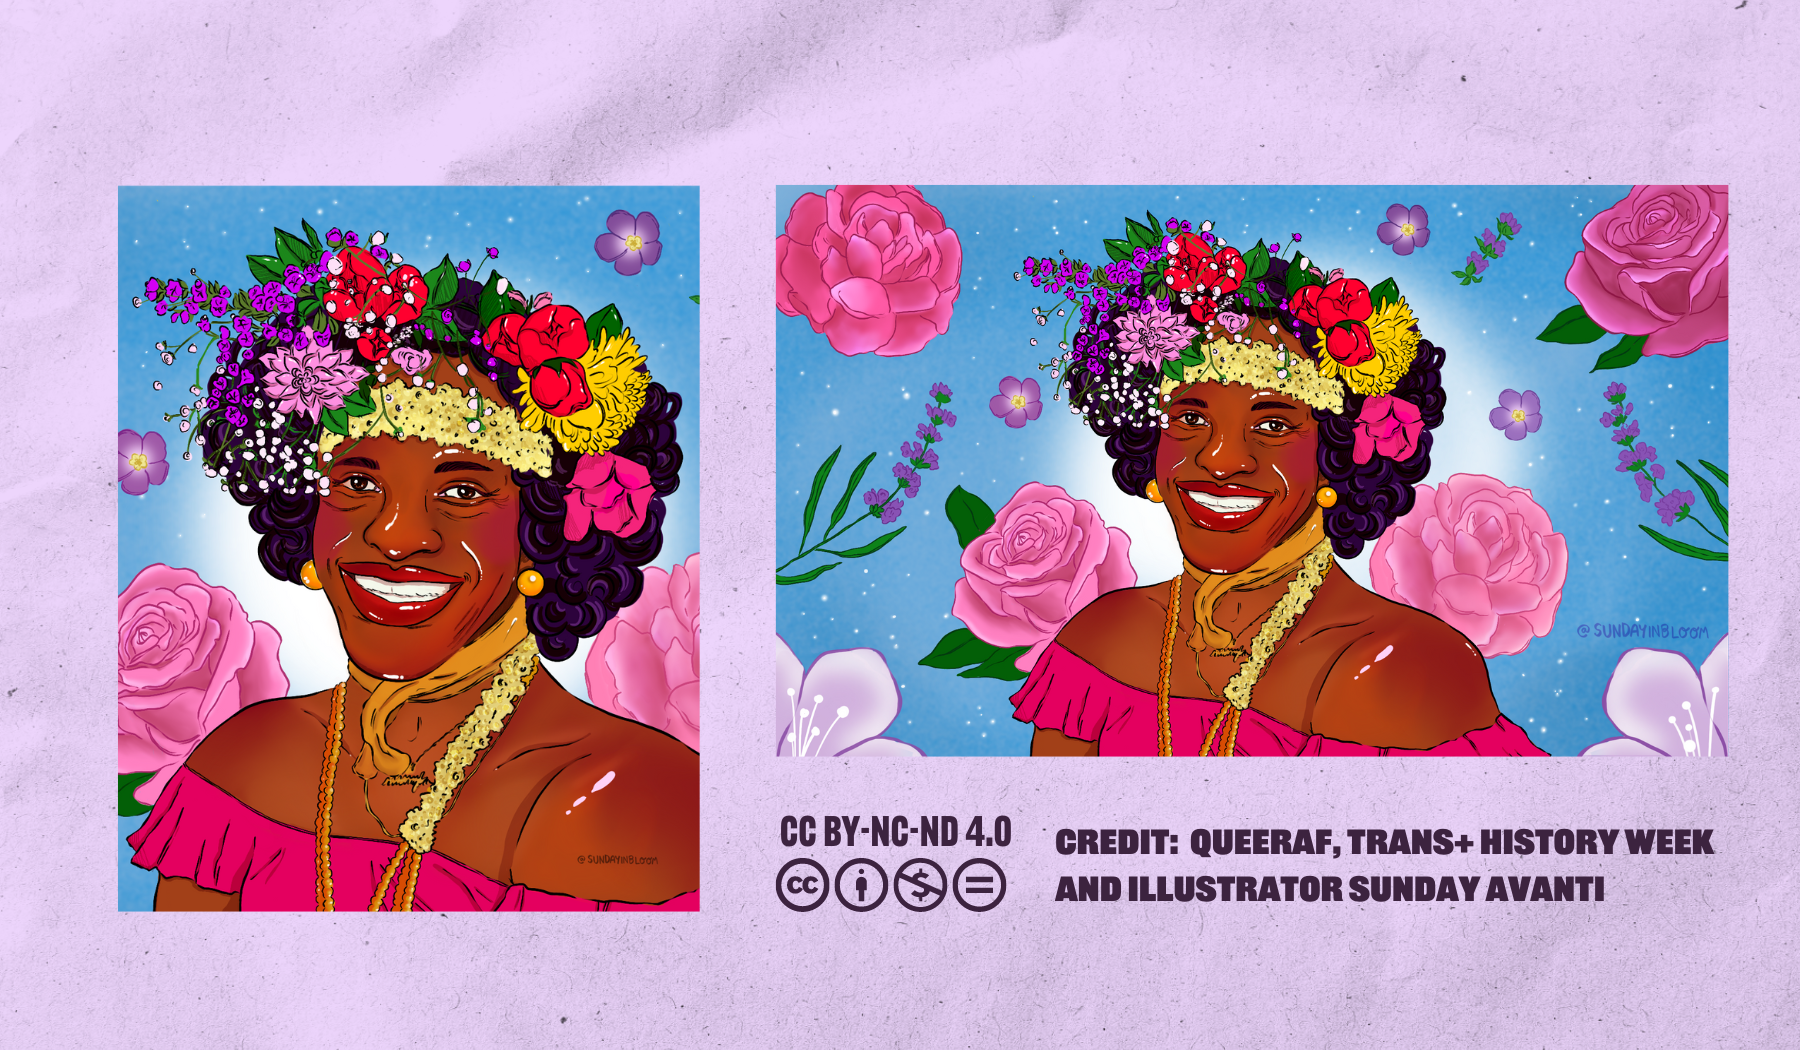 Marsha P. Johnson Trans+ History Week and QueerAF illustration by QueerAF, Trans+ History Week, Sunday Avanti is licensed under CC BY-NC-ND 4.0